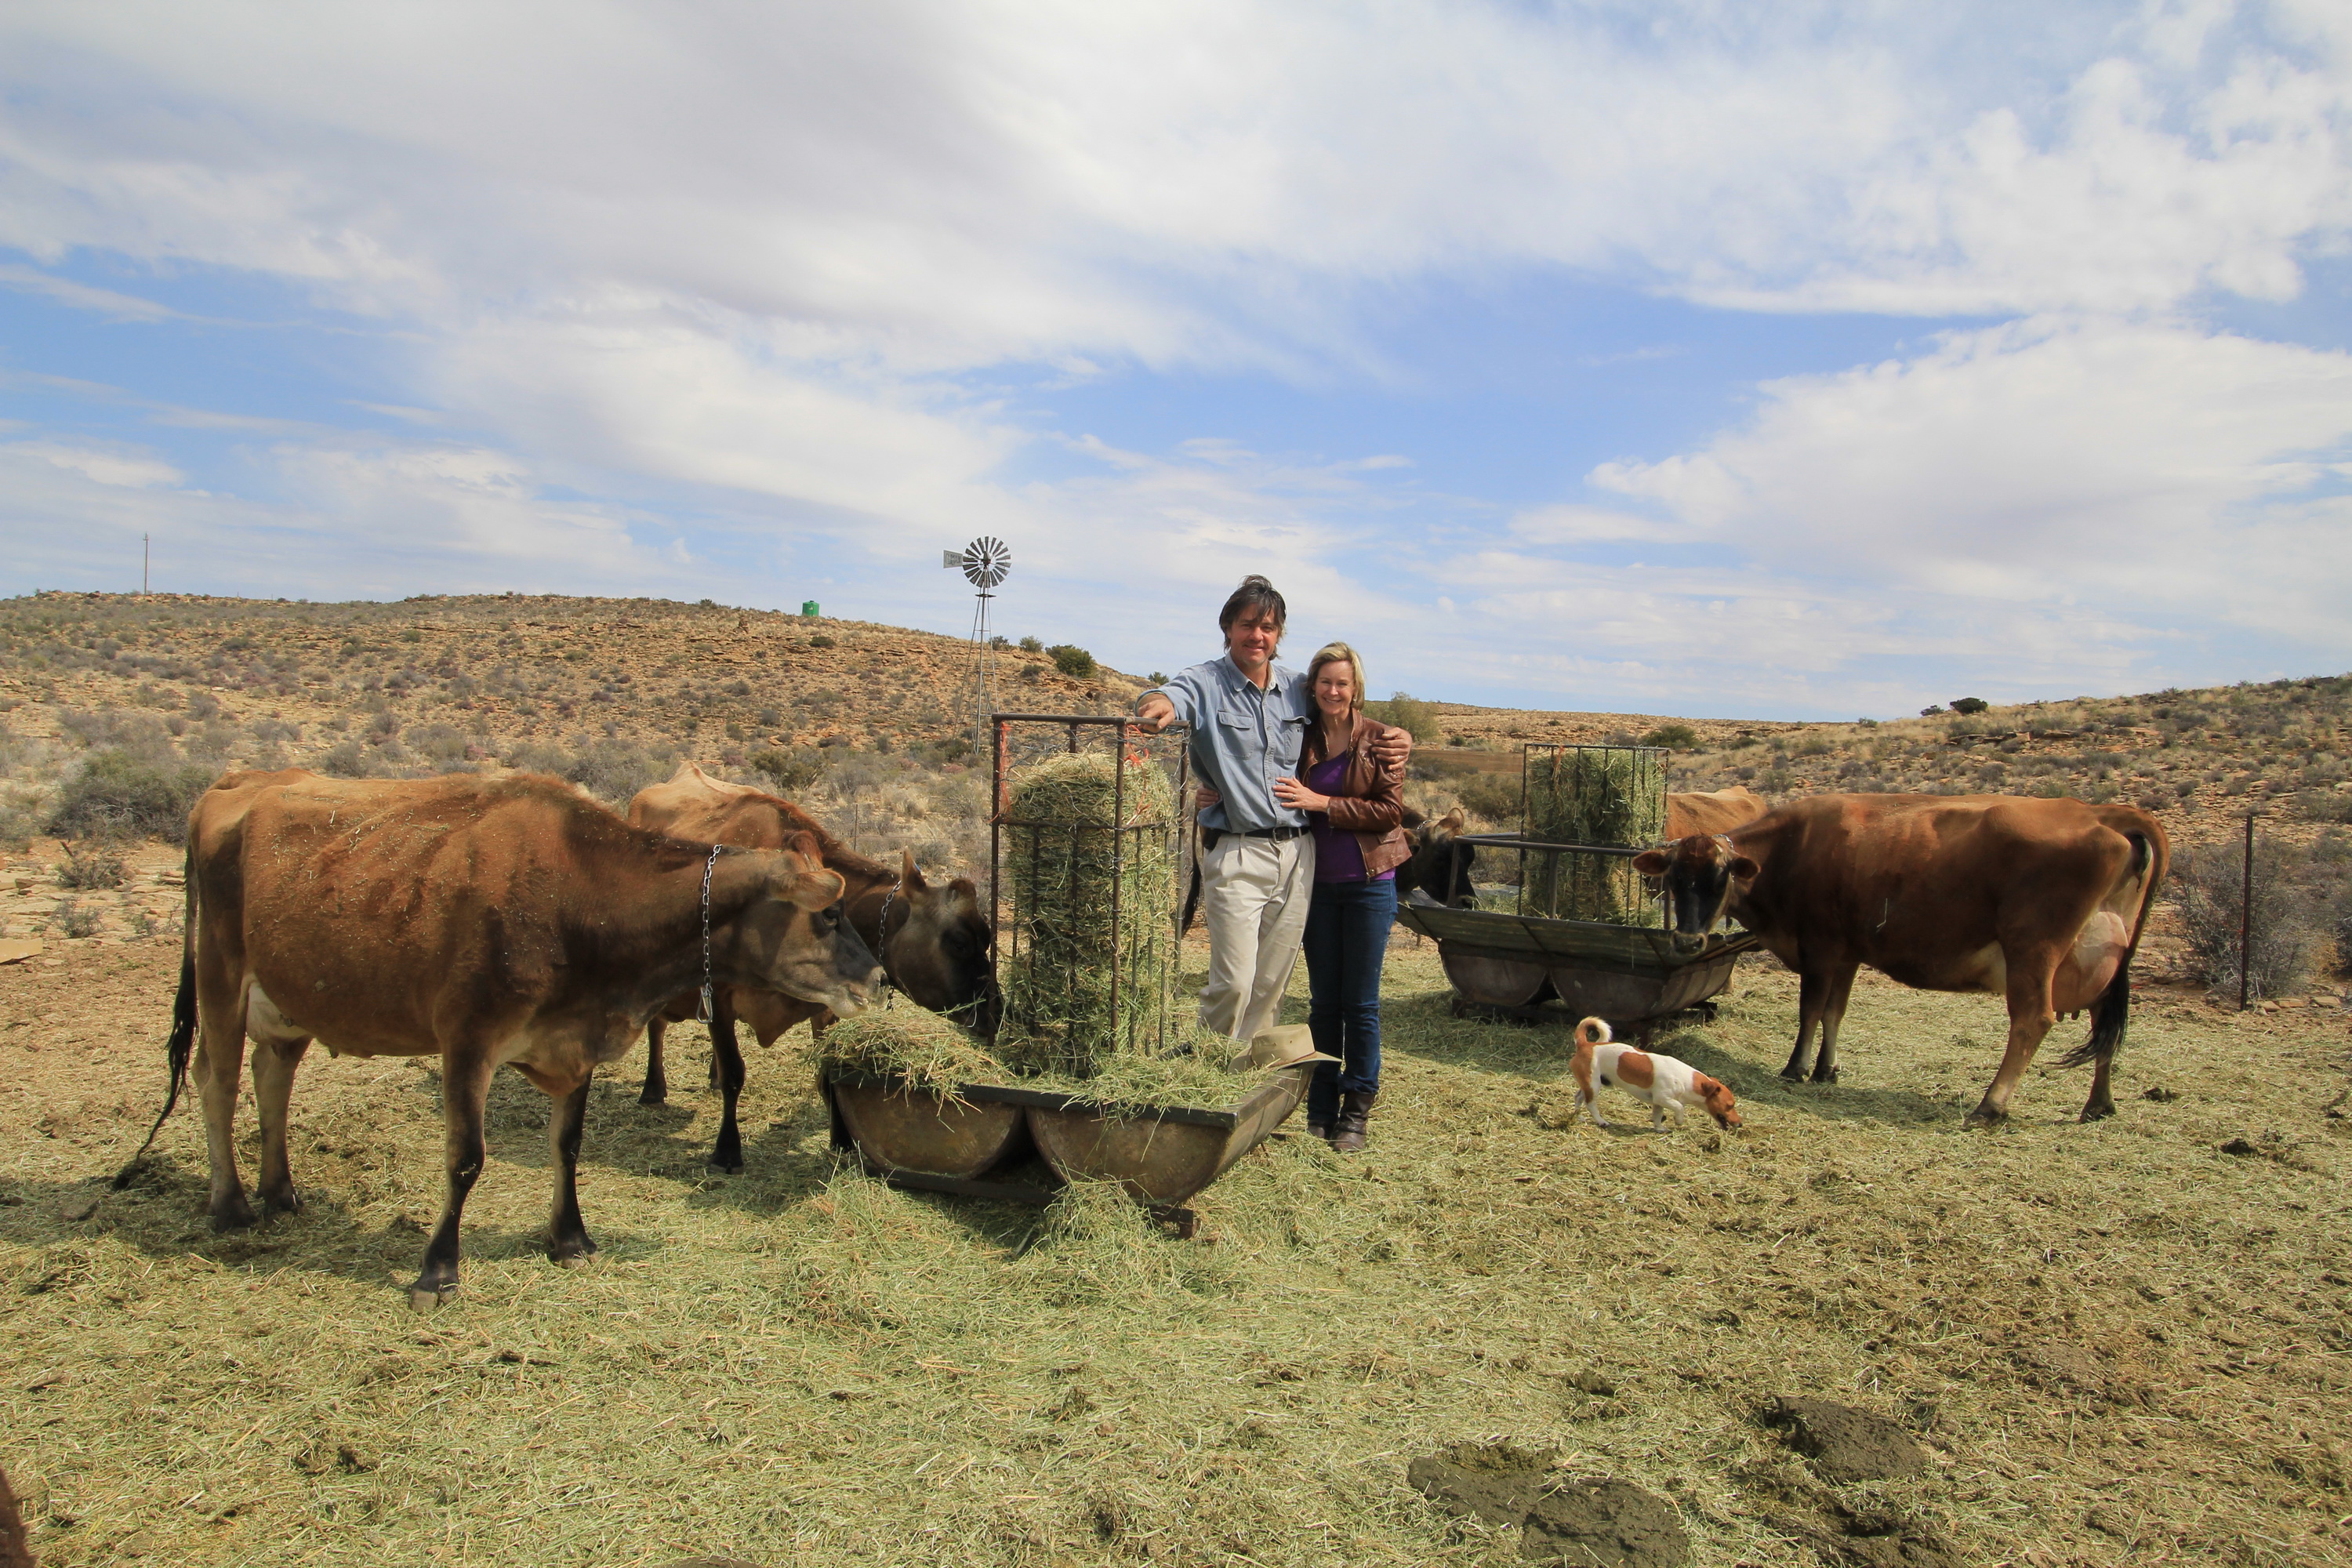 Peter and Francy Schoeman and their Jersey cows, who produce some of South Africa’s finest cheese. Image: Chris Marais